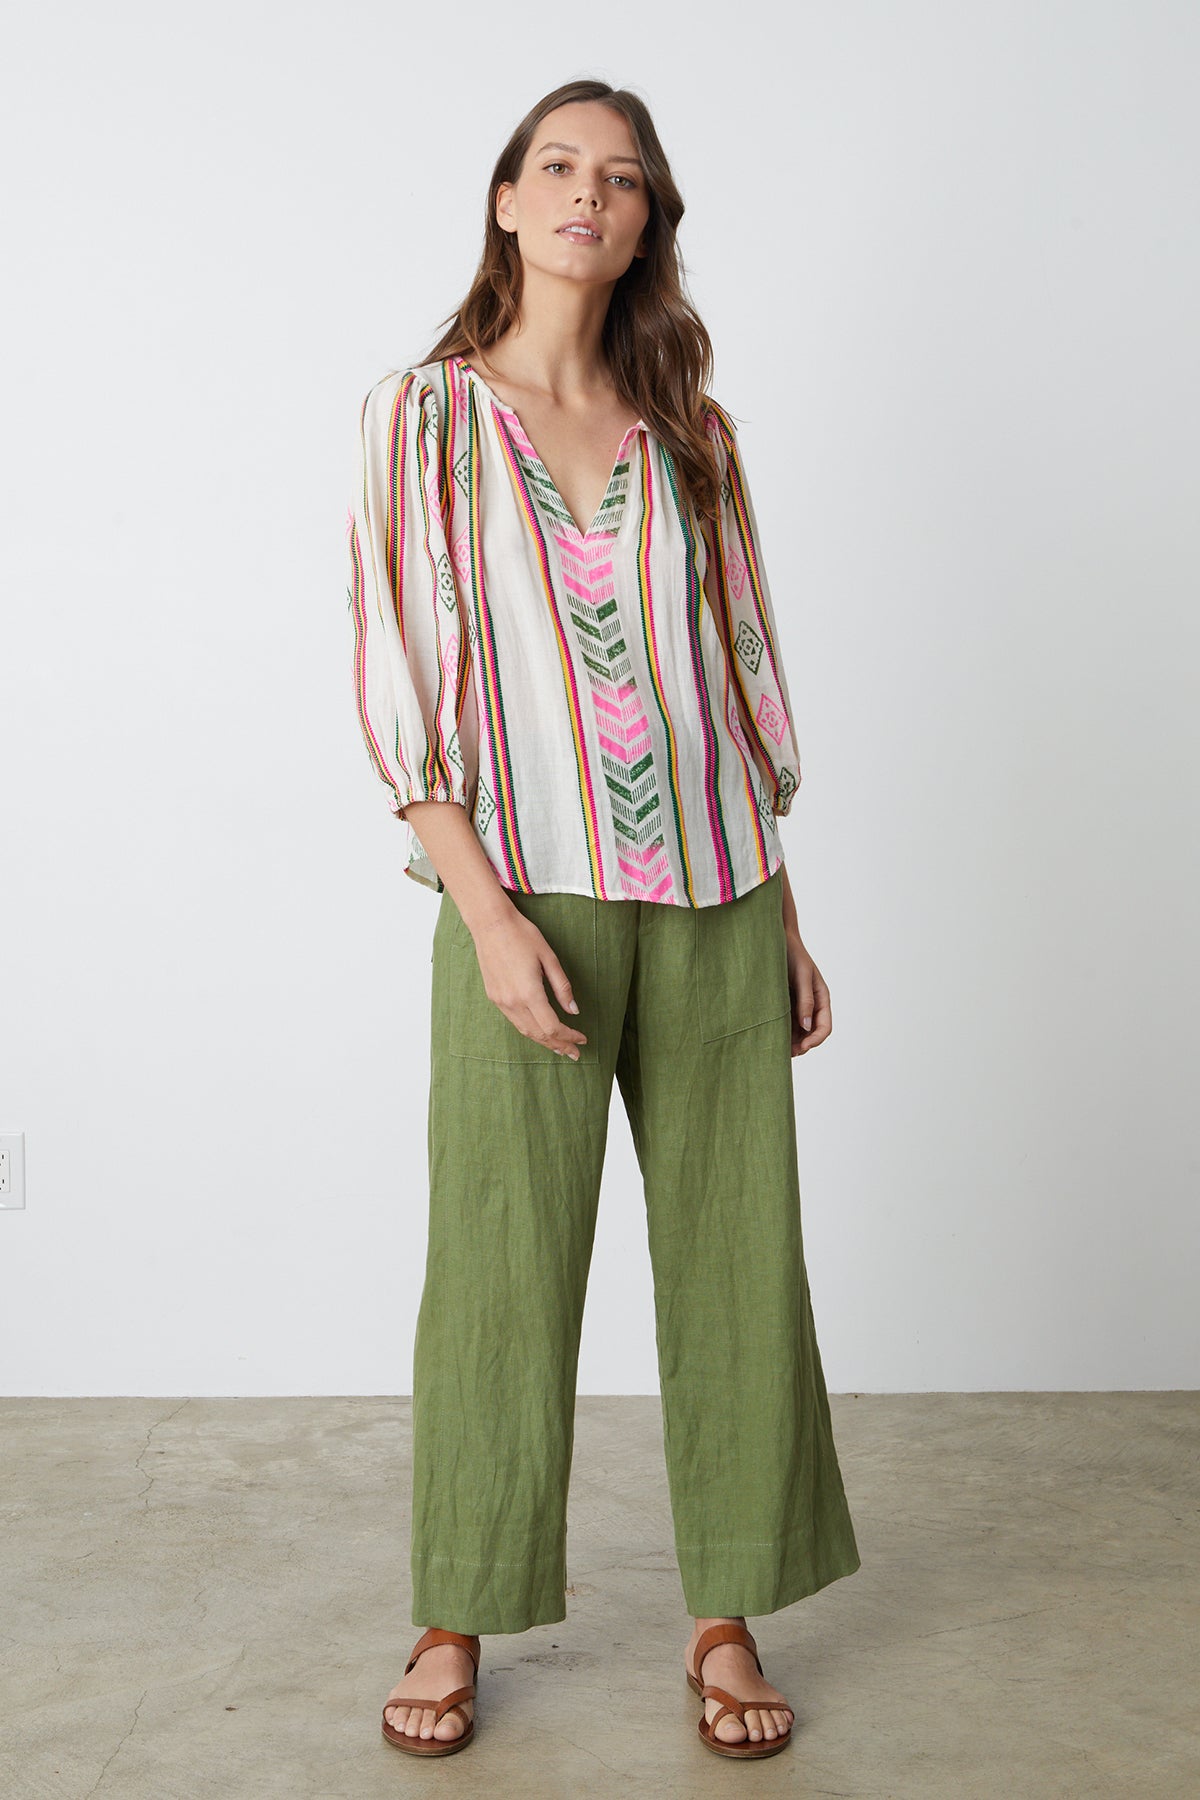   Beth Boho Top in multi colored jacquard print with Dru pant in basil green full length front 